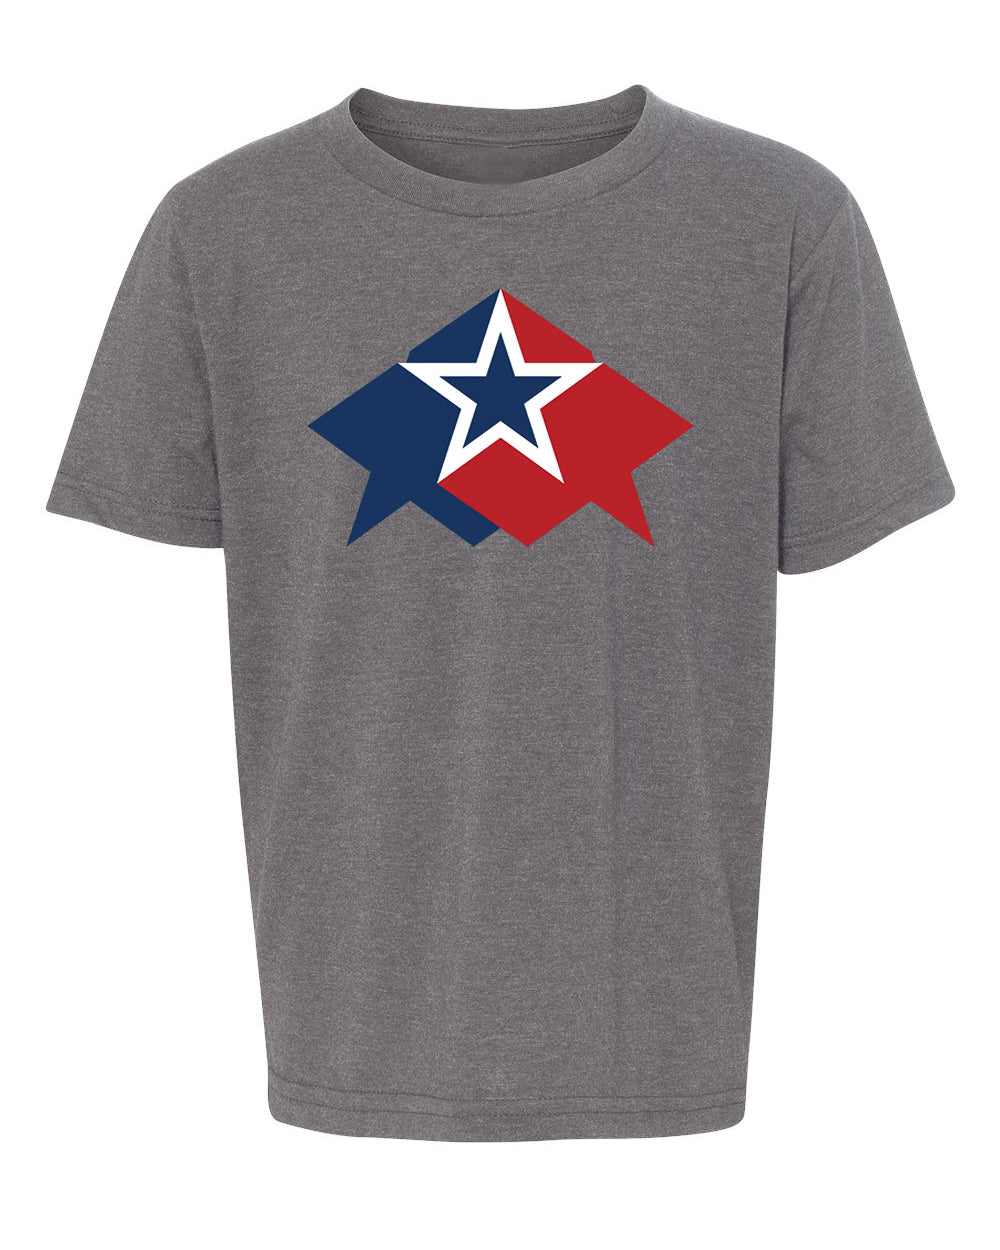 Red, White & Blue Star Kids 4th of July T Shirts - Mato & Hash